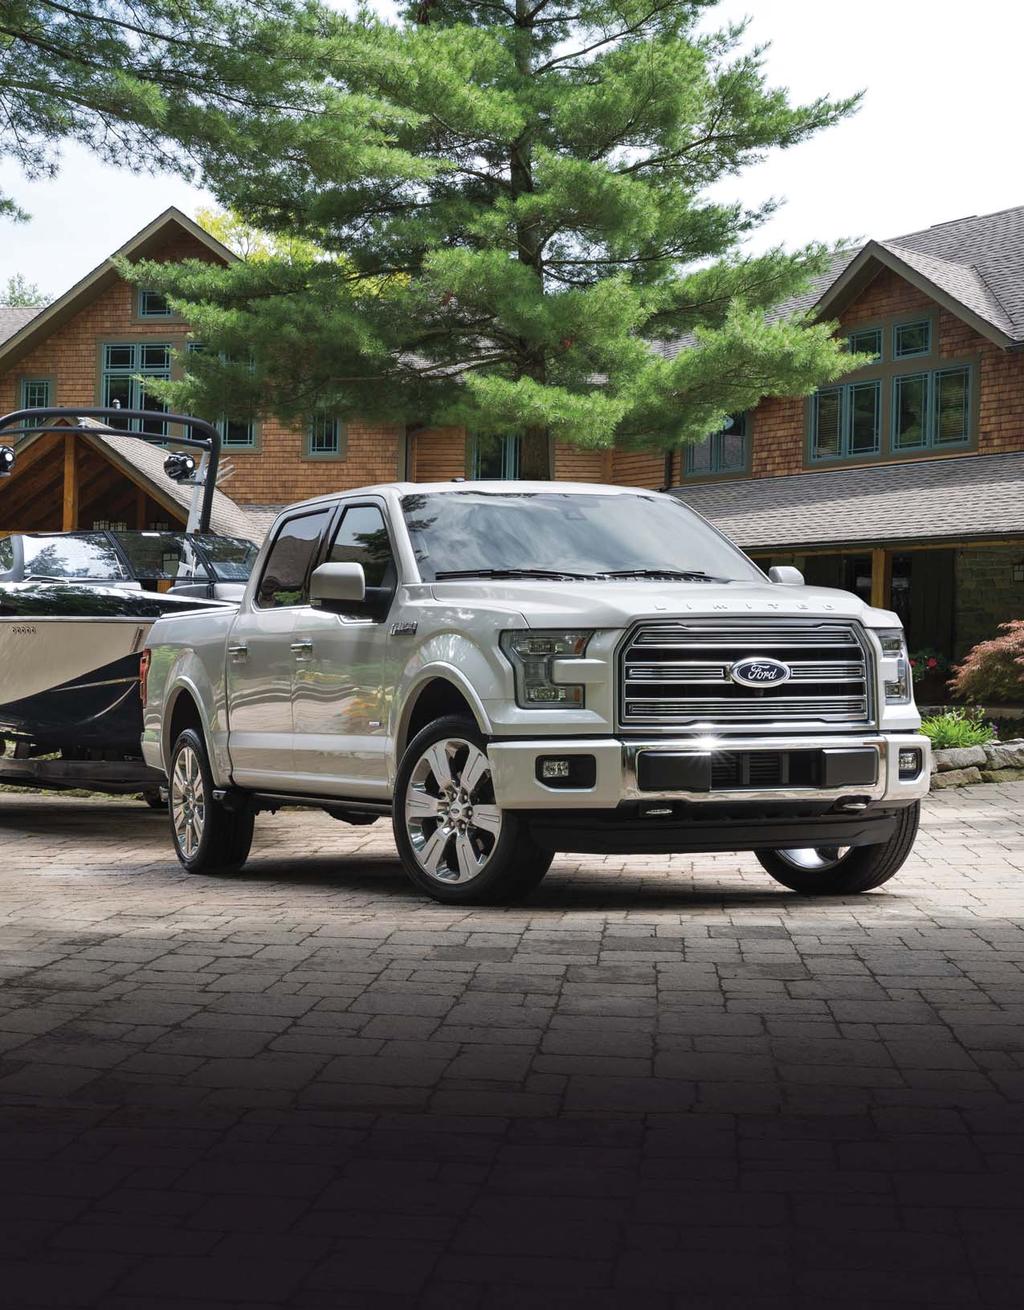 TRAILER TOWING 2017 RV & TRAILER 17 SELECTOR F-150 AND SUPER DUTY Select the F-Series cab design